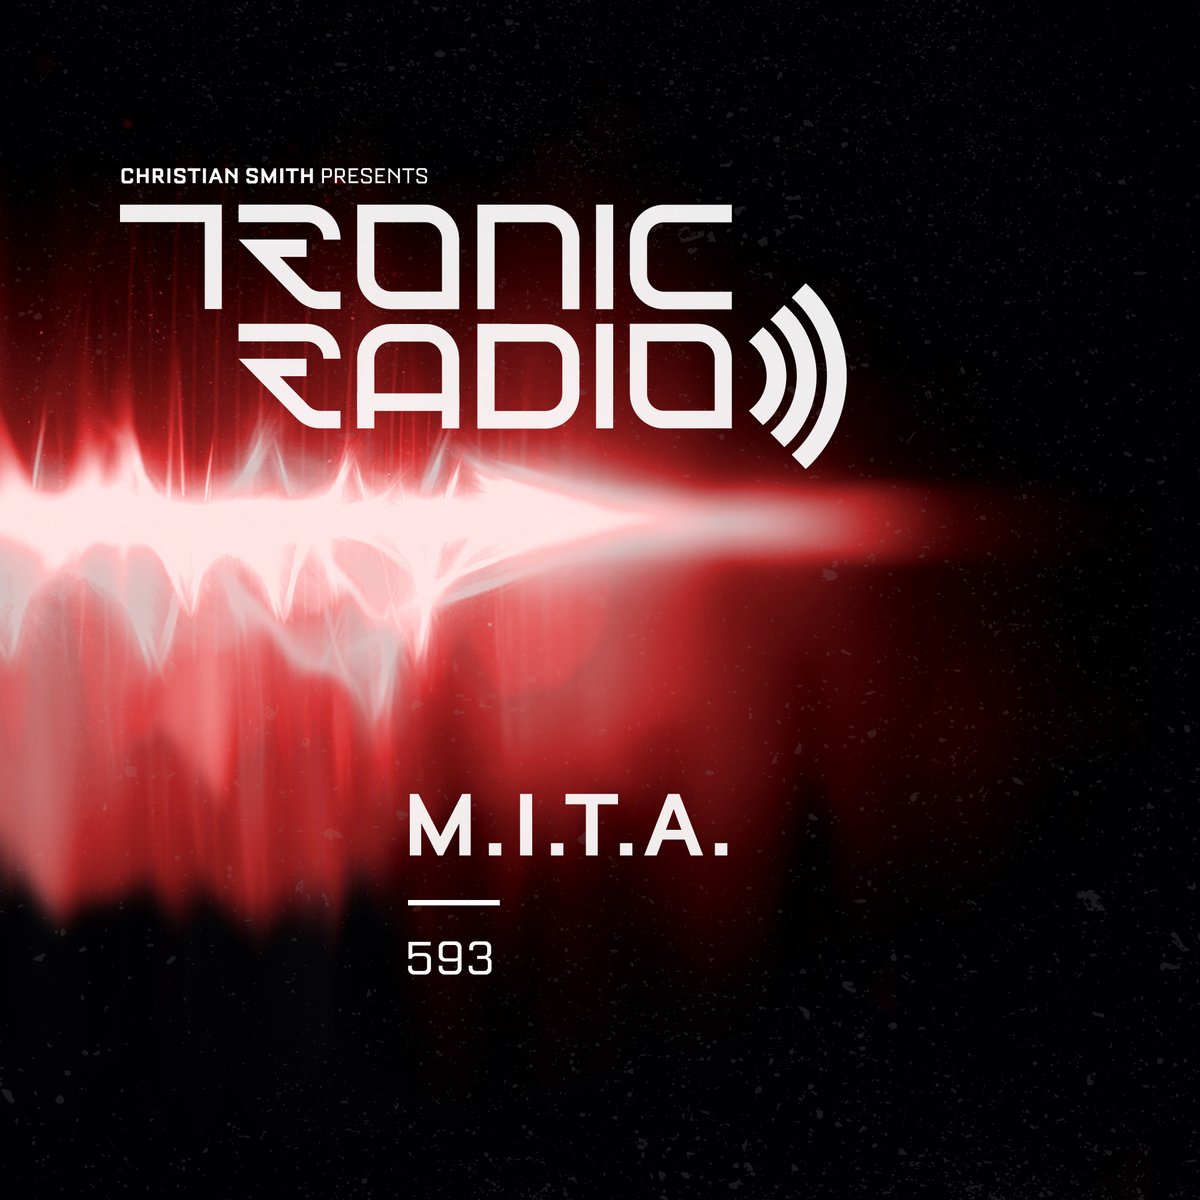 A new episode on #TronicRadio is out today featuring M.I.T.A. on an exclusive mix! ▶️▶️▶️ soundcloud.com/christiansmith…